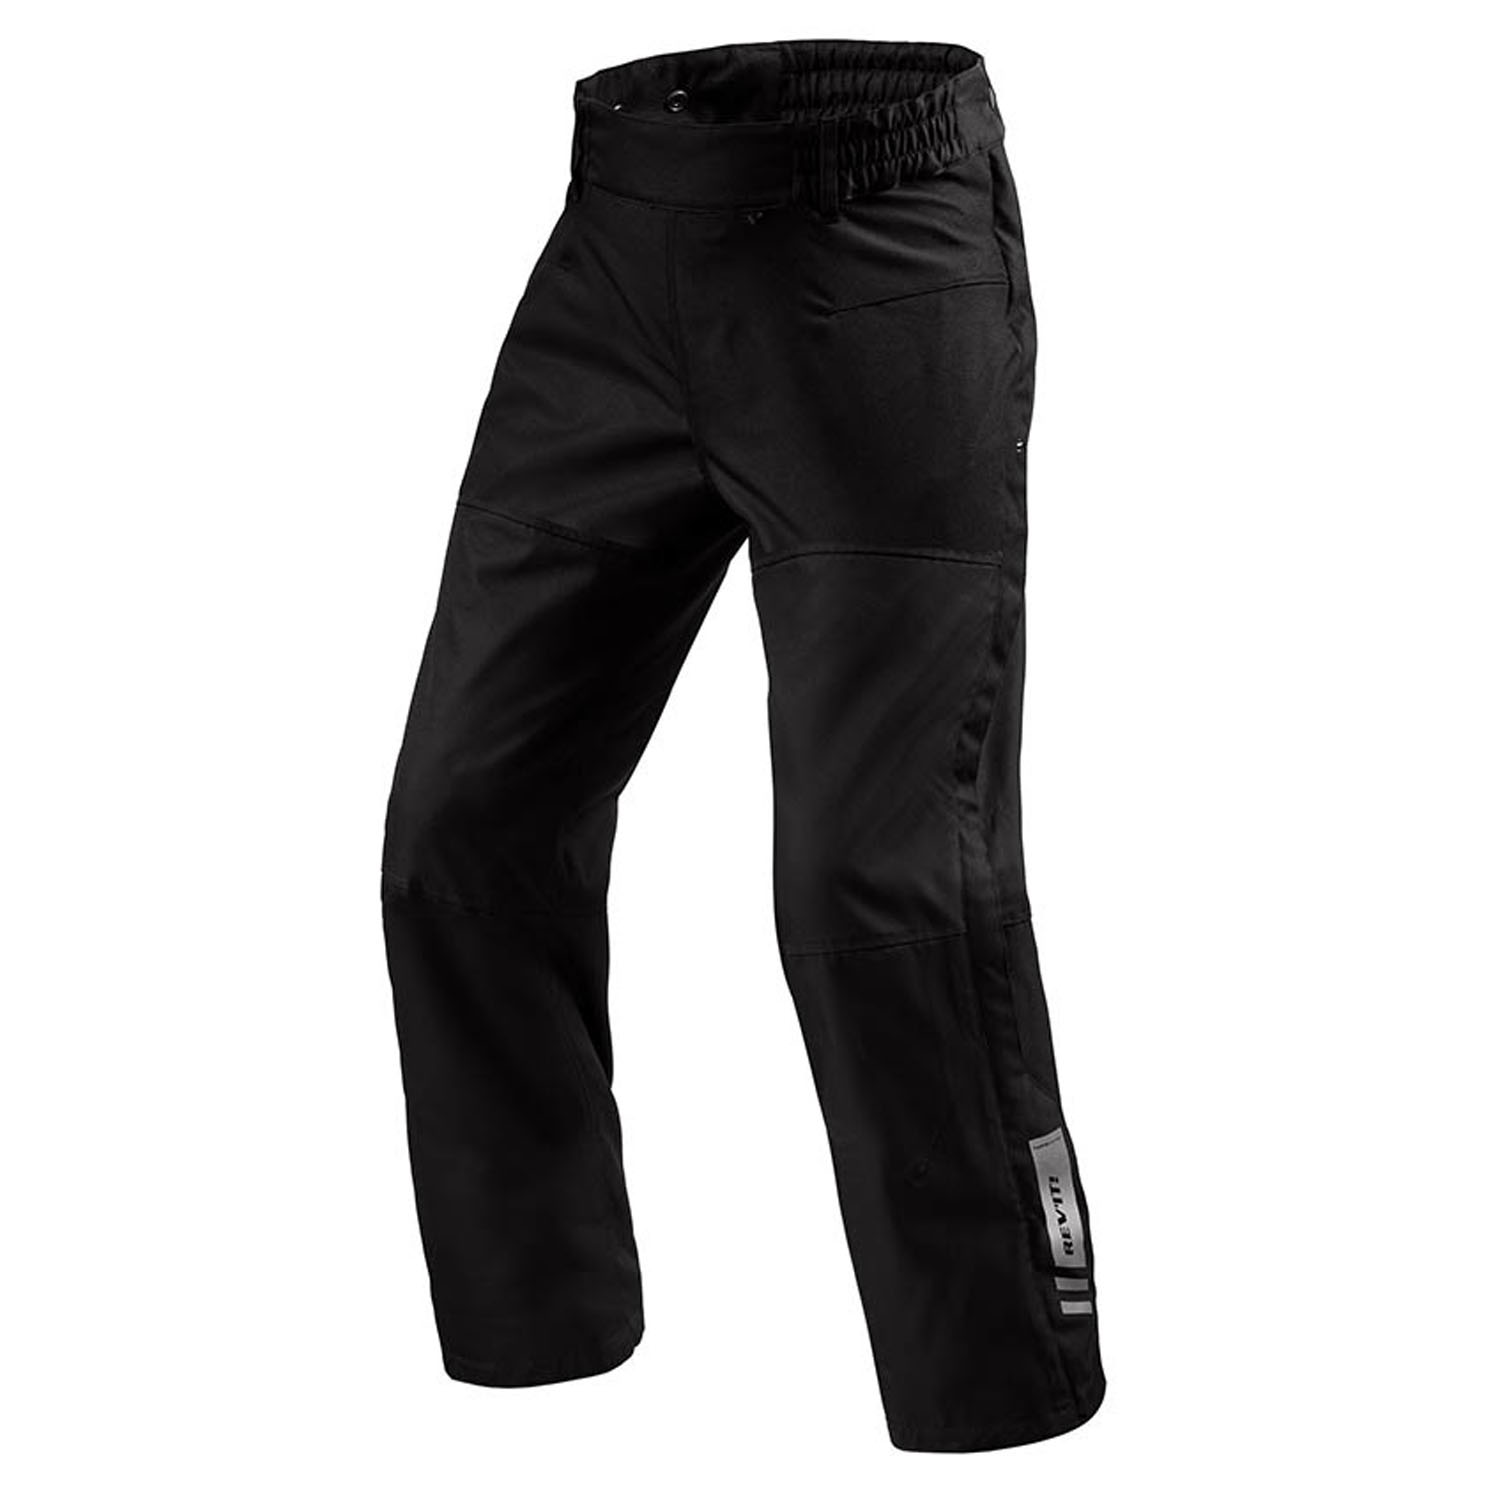 Image of REV'IT! Pants Axis 2 H2O Black Long Motorcycle Pants Taille L